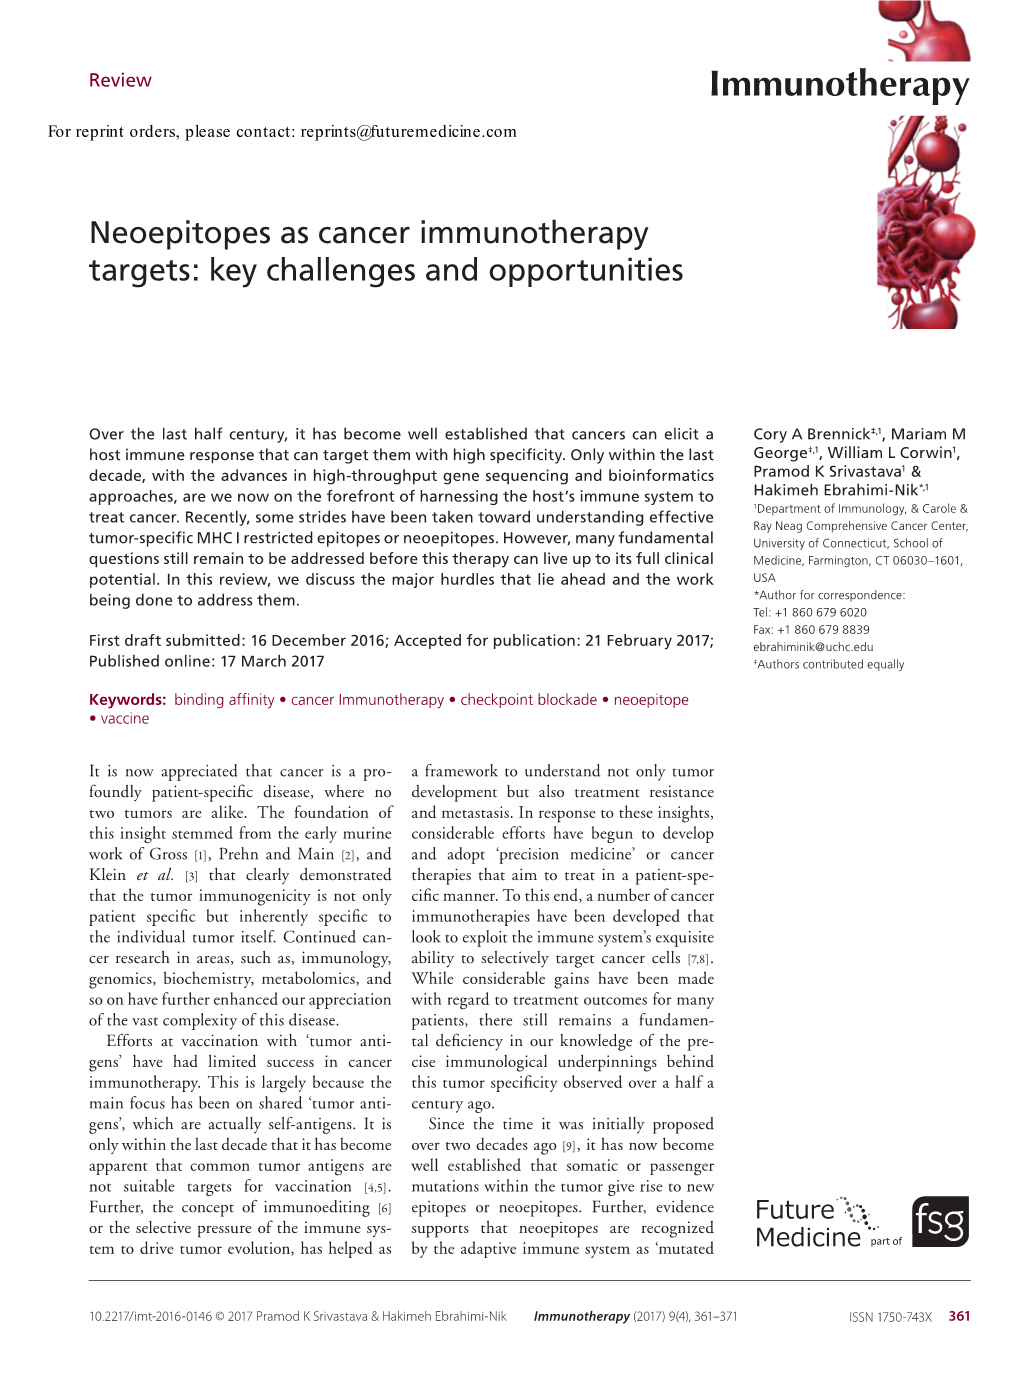 Neoepitopes As Cancer Immunotherapy Targets: Key Challenges and Opportunities